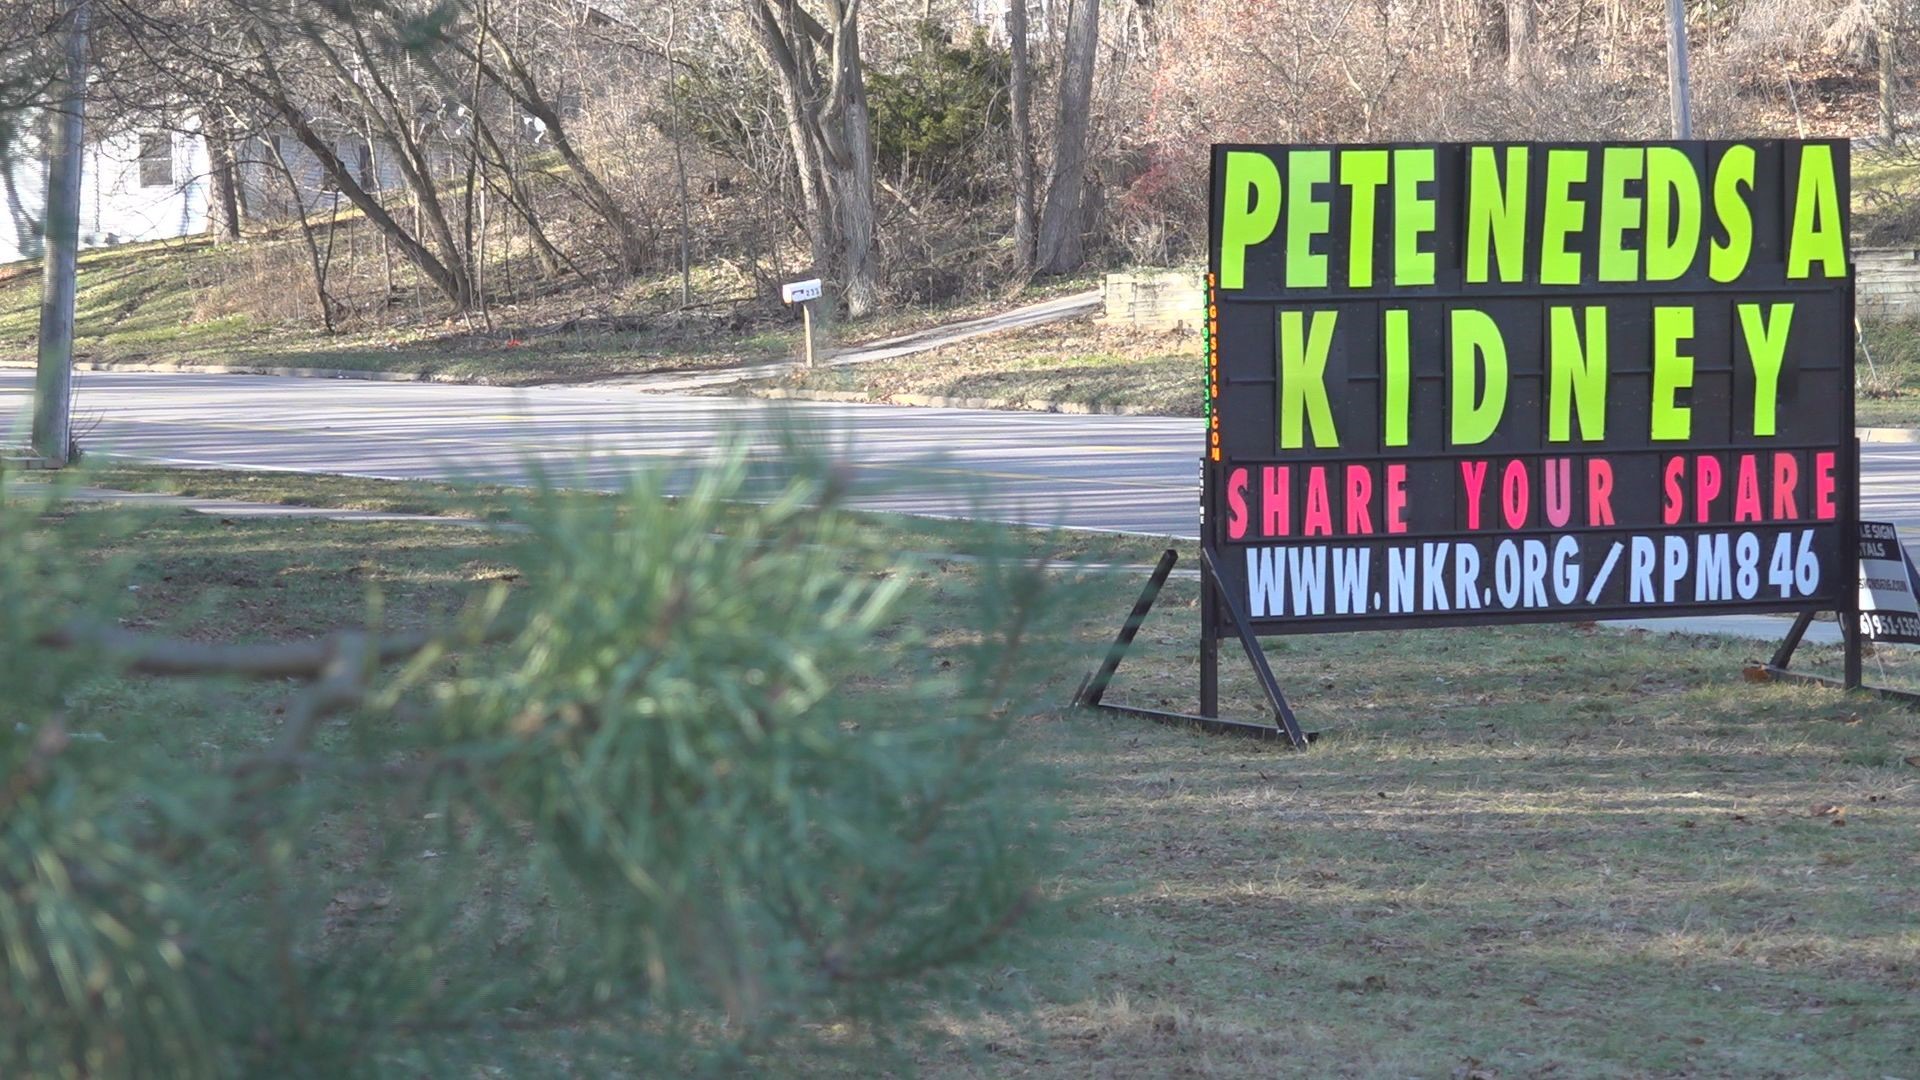 Pete Bottoroff's been in kidney failure for the past two years, and after putting up a huge road sign and with help from 13 ON YOUR SIDE, he's finally found a donor.